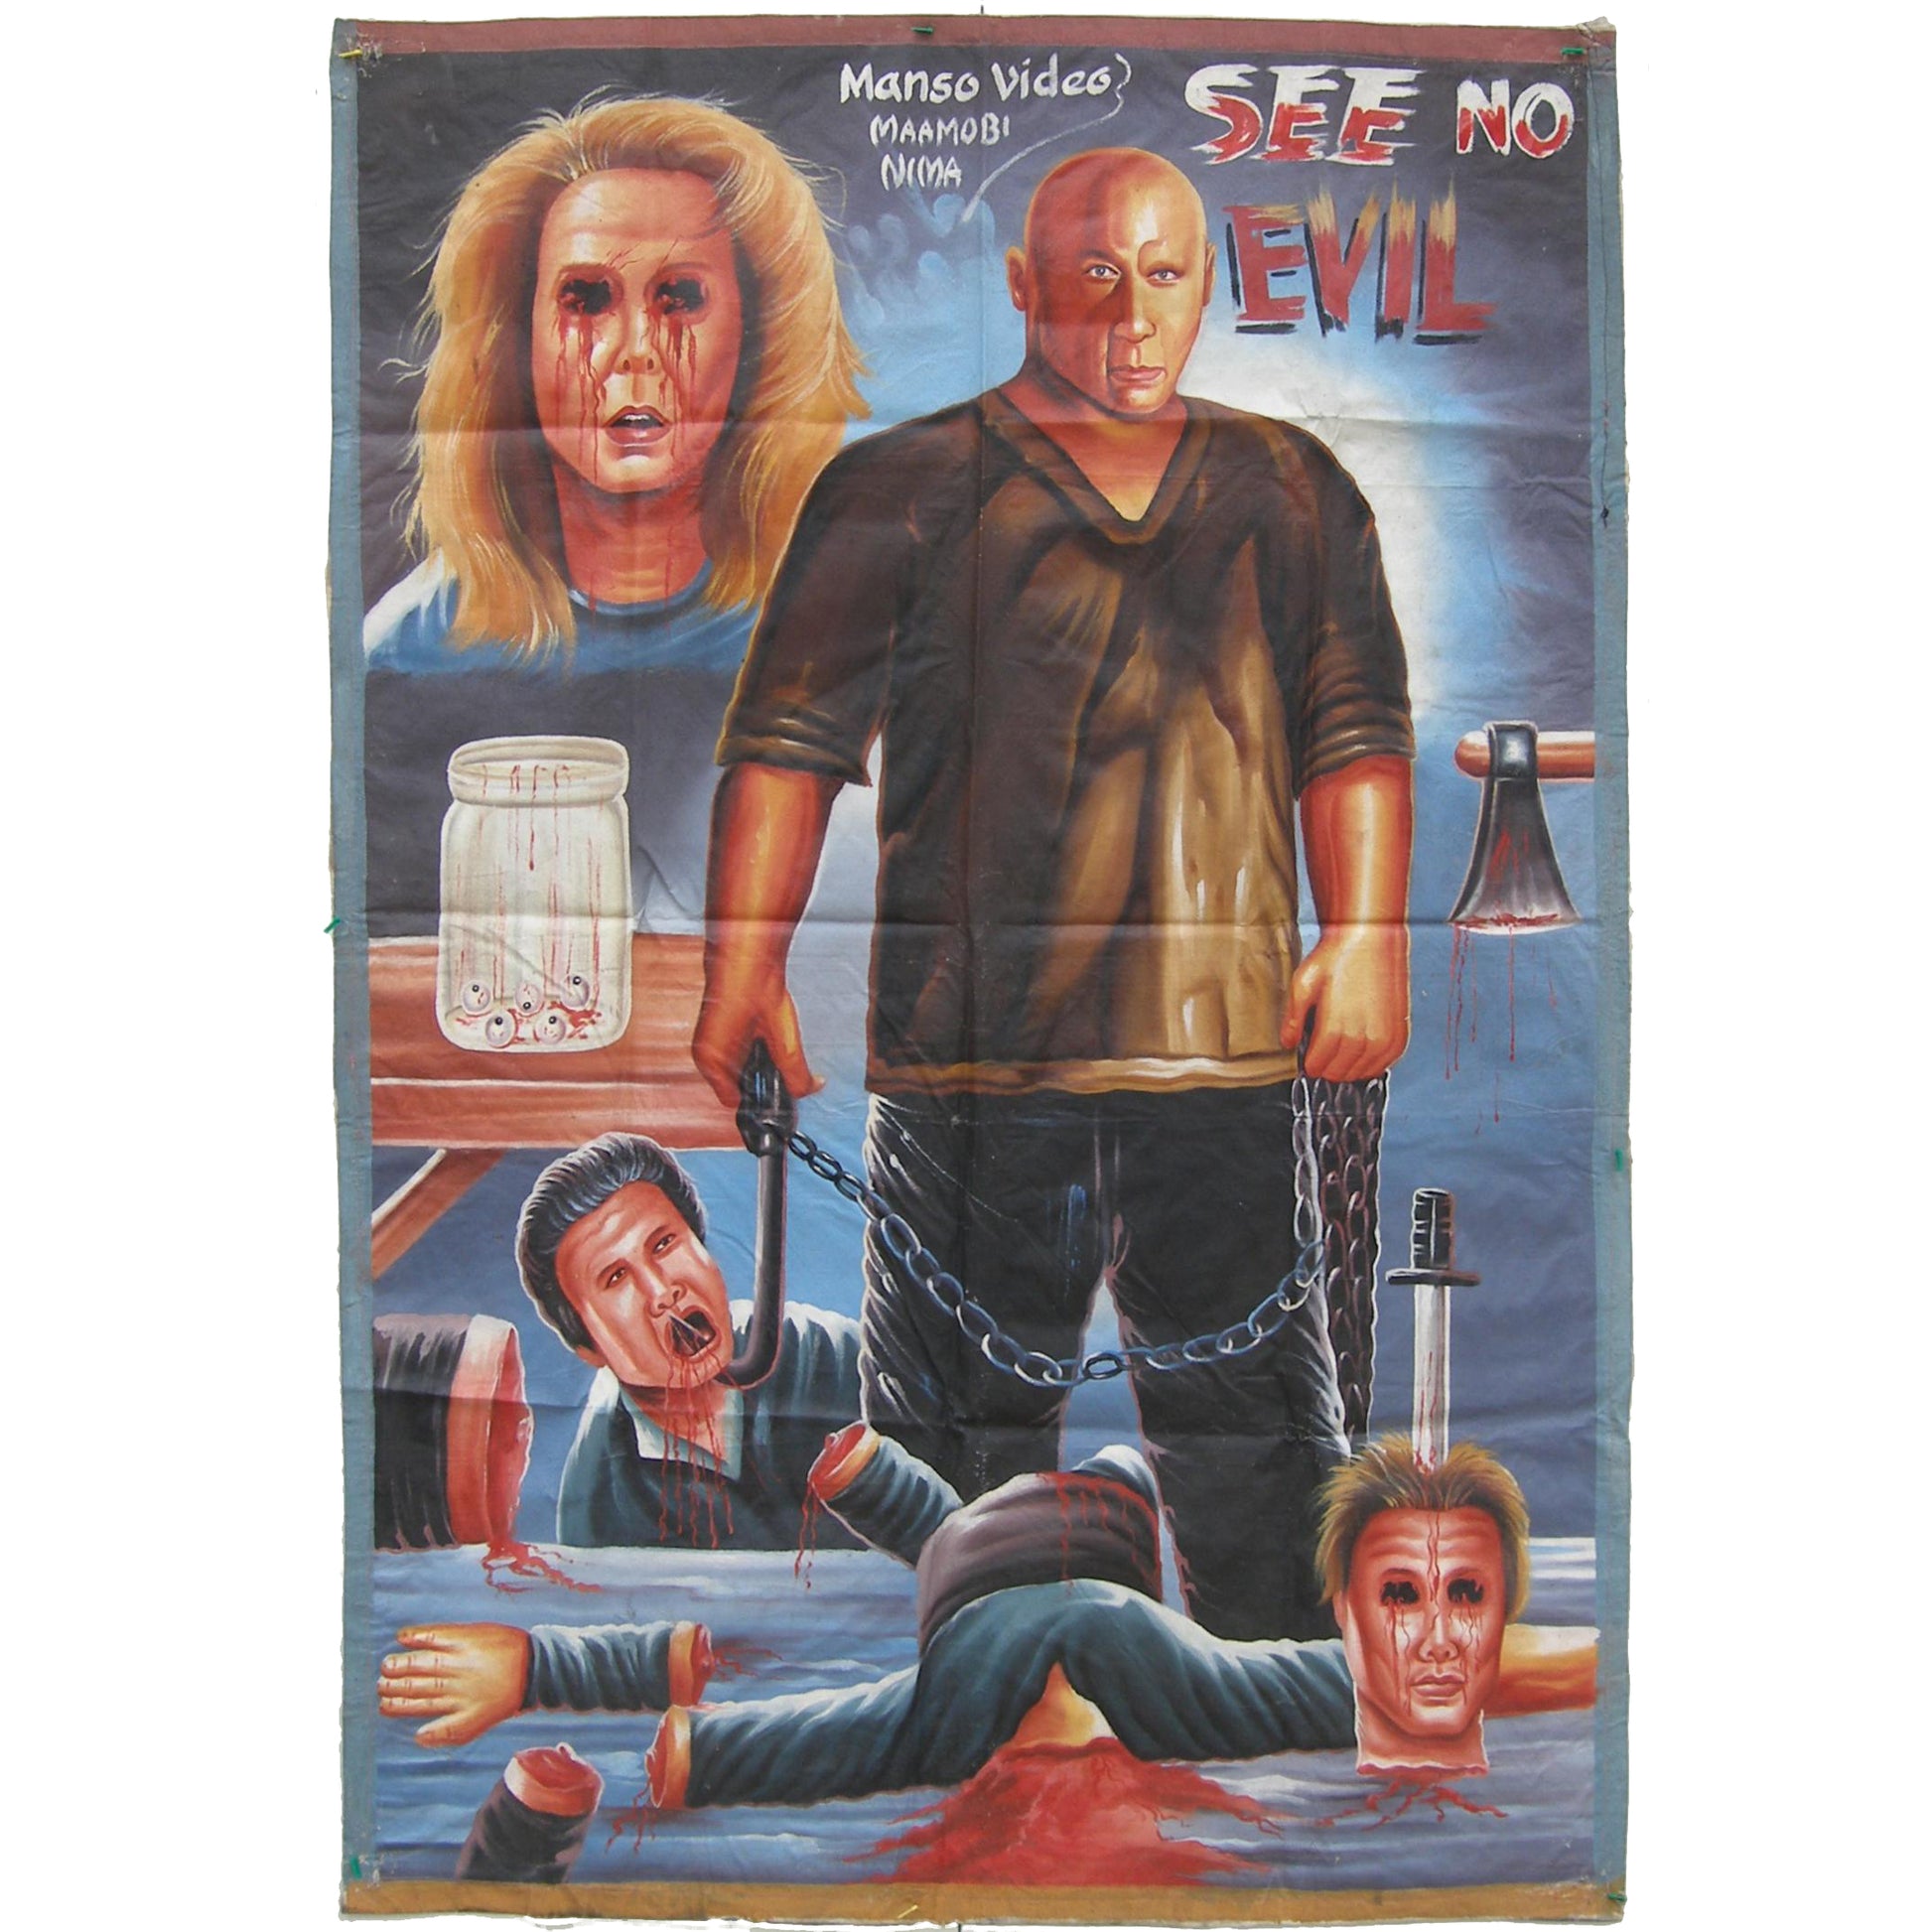 SEE NO EVIL MOVIE POSTER HAND PAINTED IN GHANA FOR THE LOCAL CINEMA ART